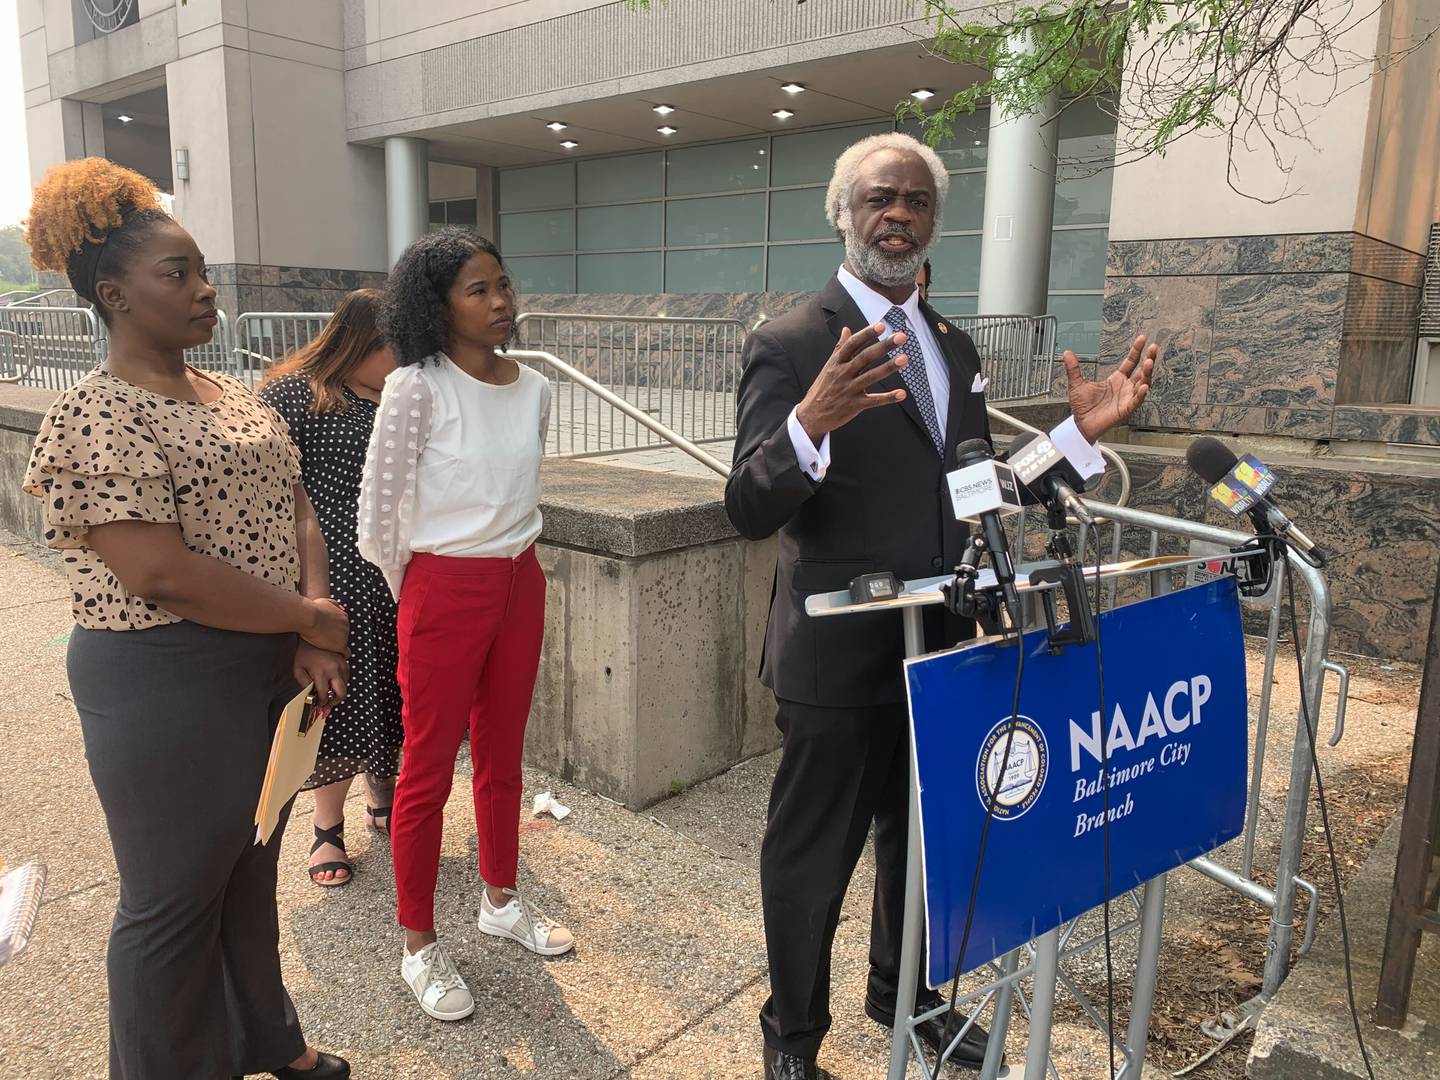 Rev. Kobi Little of Baltimore's NAACP chapter speaks outside BPD headquarters on Thursday. He decried what he called a lack of transparency from Mayor Brandon Scott in the selection of Acting Police Commissioner Richard Worley.